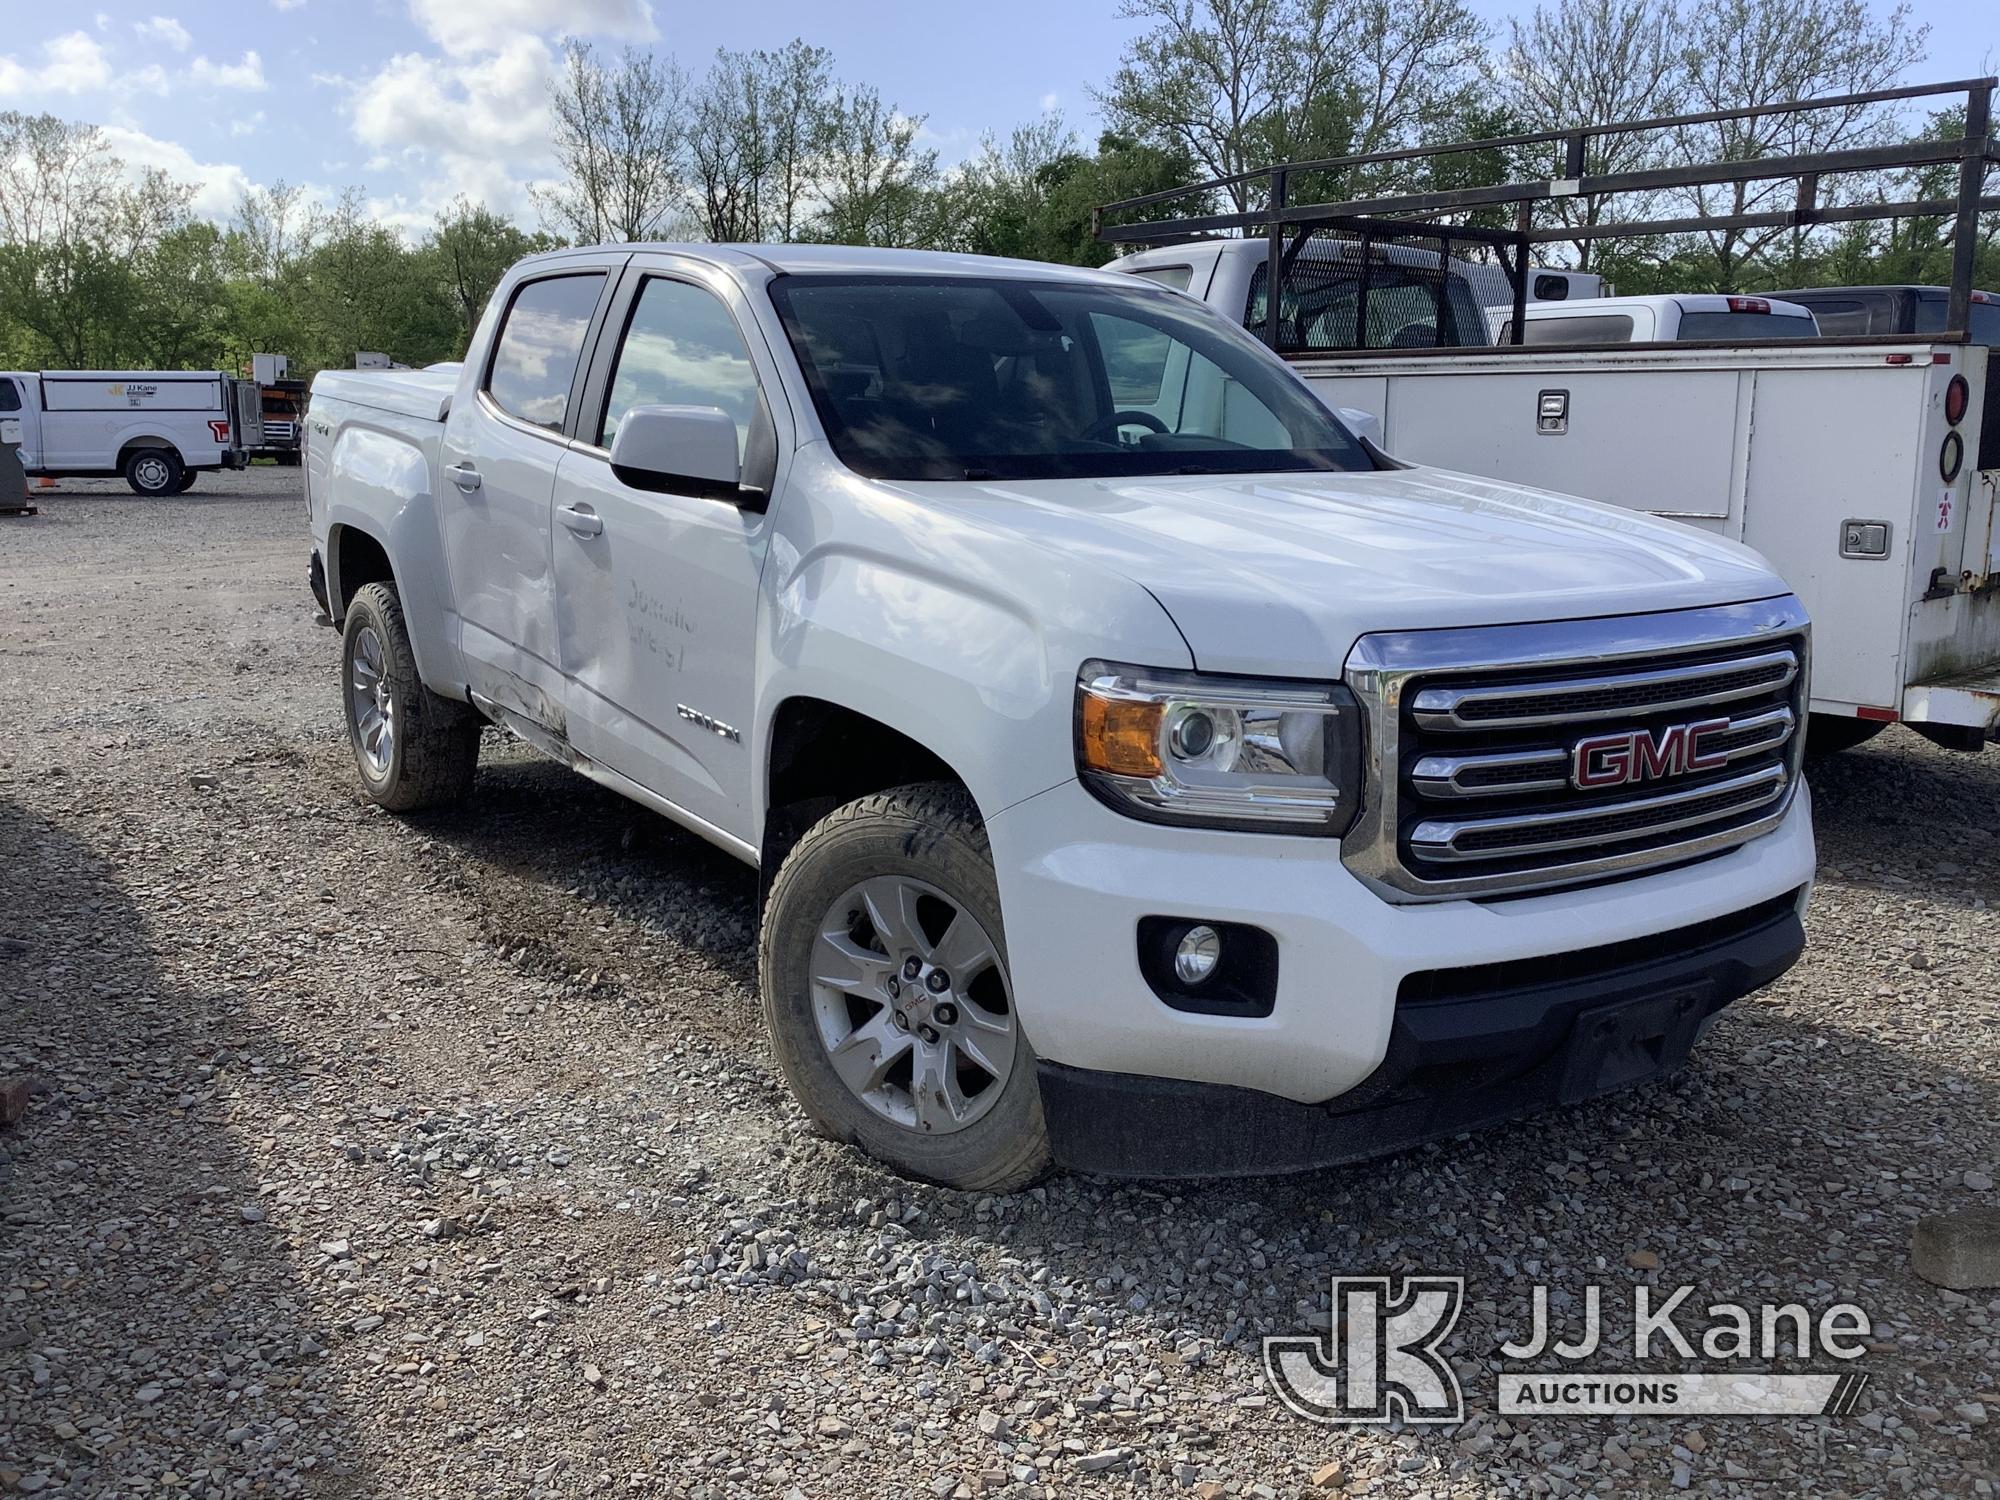 (Smock, PA) 2016 GMC Canyon 4x4 Crew-Cab Pickup Truck Title Delay) (Wrecked, Runs, Not Moving, No St